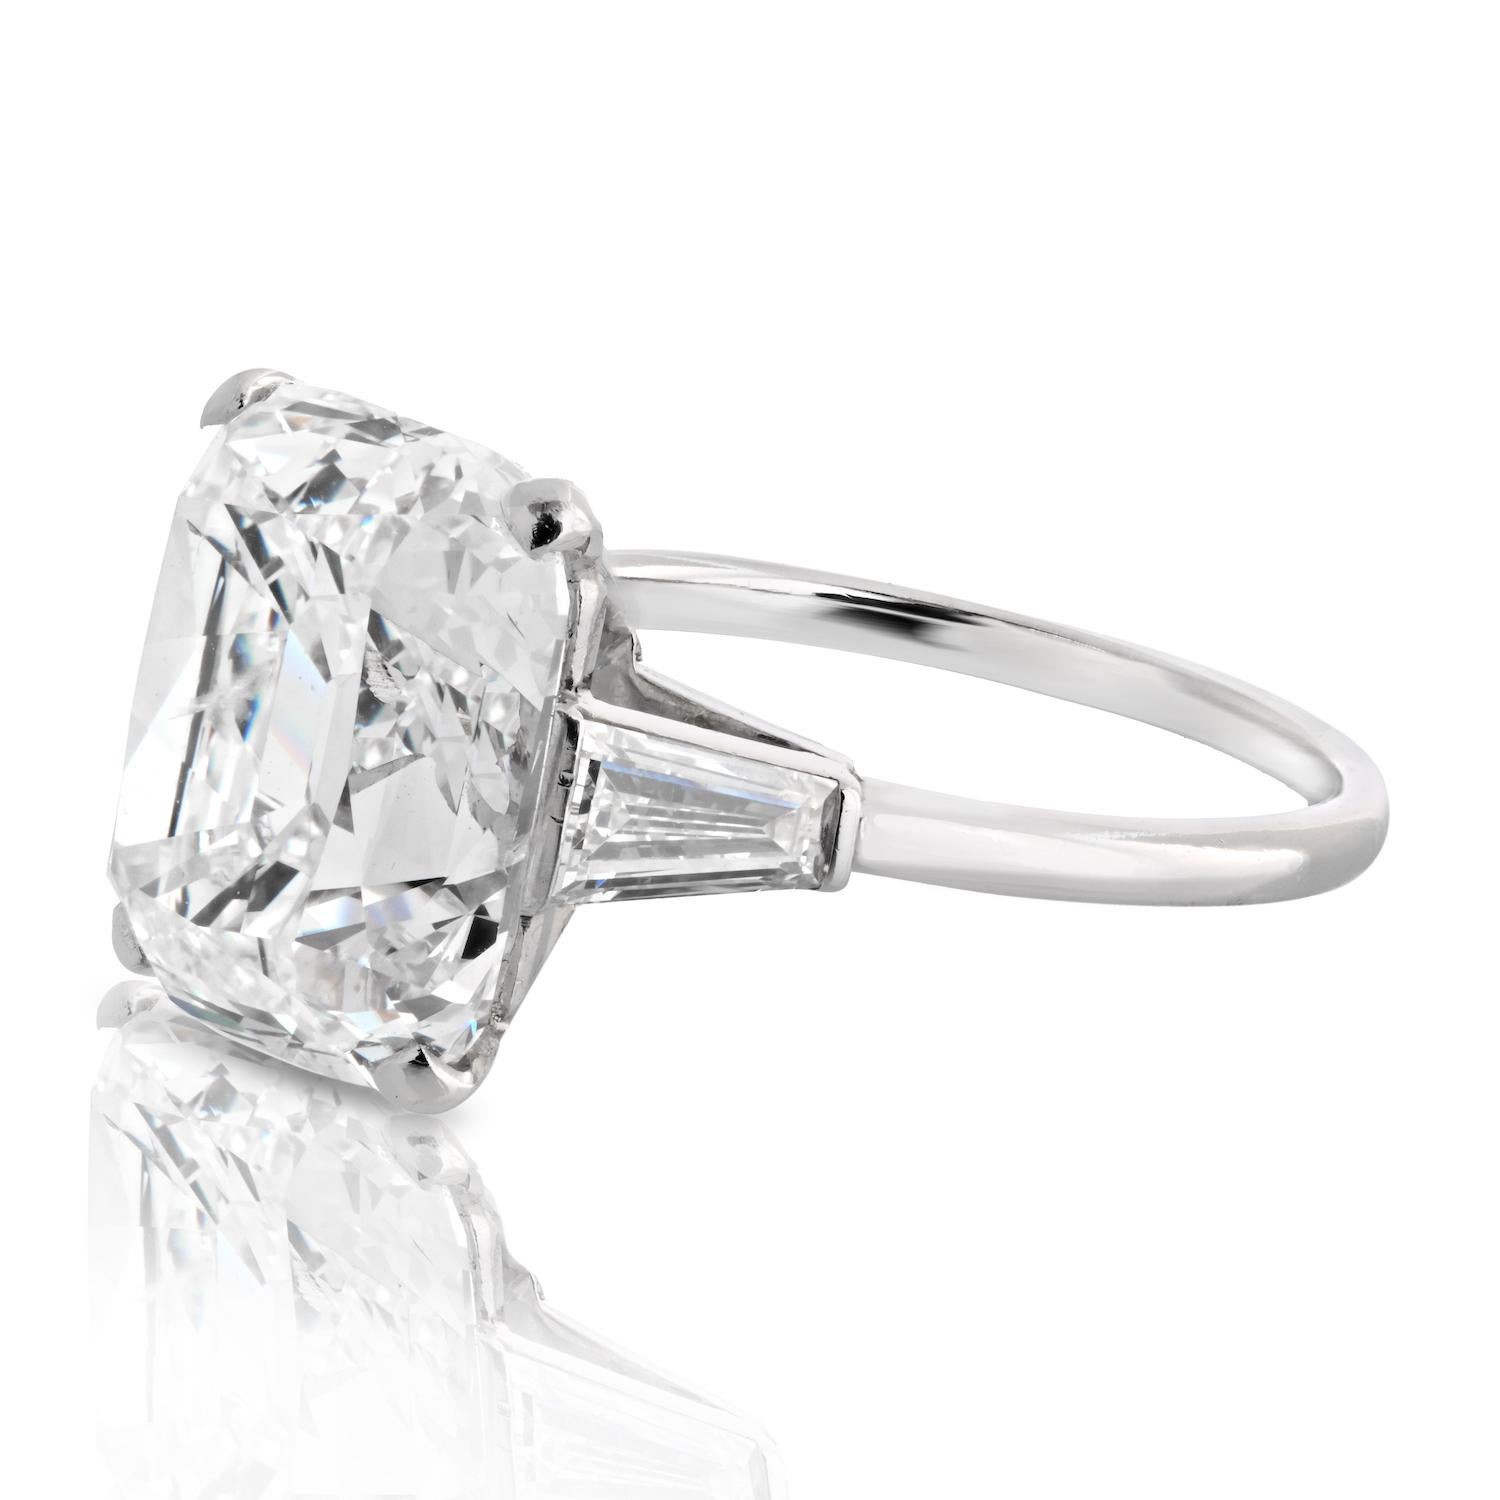 Modern 8.17ct Cushion Old Mine Cut Diamond L color SI2 clarity GIA Engagement Ring For Sale